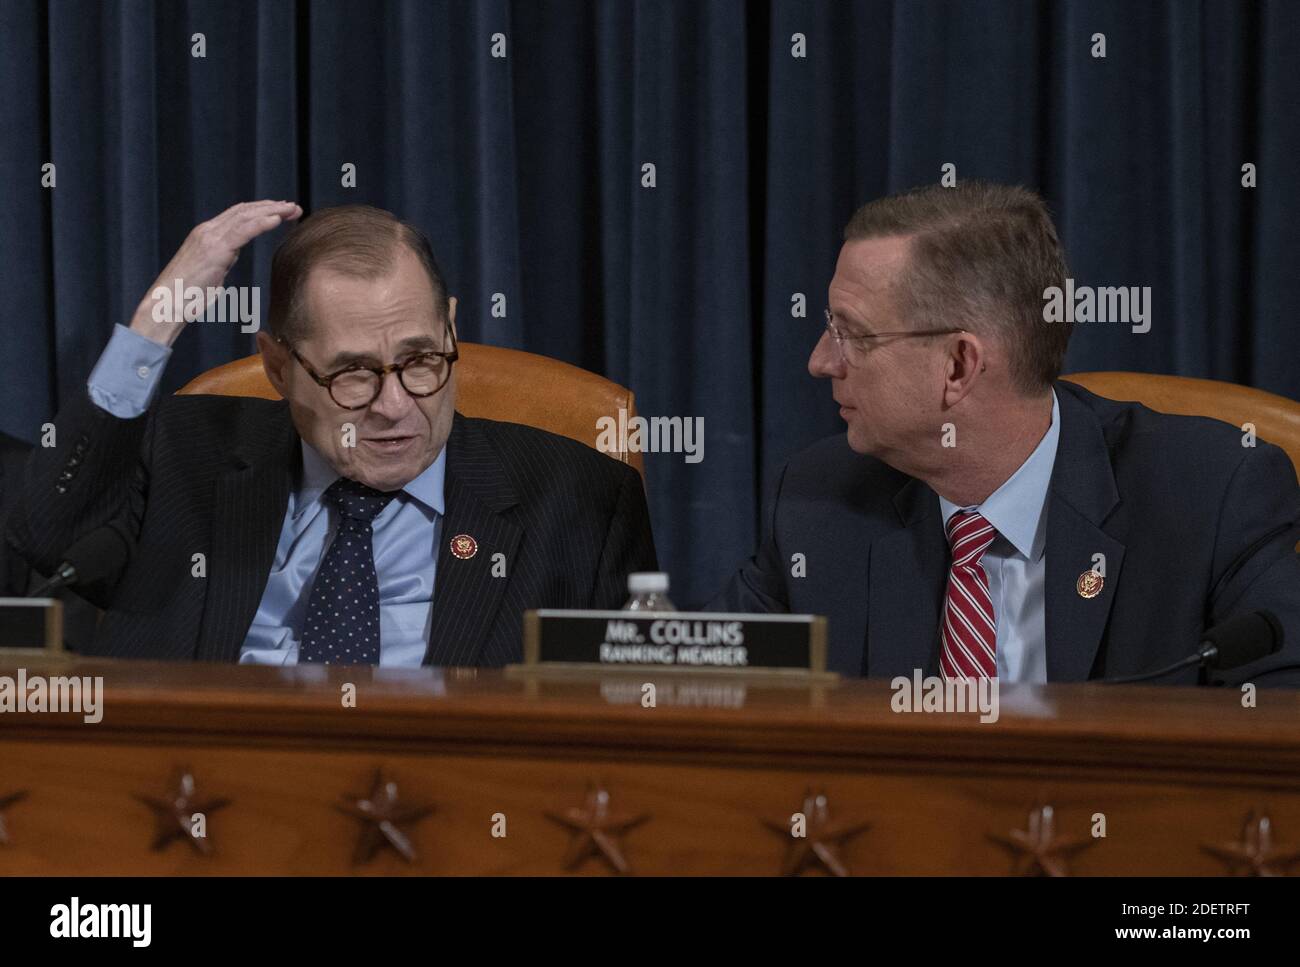 United States Representative Jerrold Nadler (Democrat of New York), Chairman, US House Judiciary Committee, left, and US Representative Doug Collins (Republican of Georgia), Ranking Member, US House Judiciary Committee, right, confer prior to hearing opening statements as the US House Committee on the Judiciary begins its markup of House Resolution 755, Articles of Impeachment Against President Donald J. Trump, in the Longworth House Office Building in Washington, DC, USA on Wednesday, December 11, 2019. Photo by Ron Sachs/CNP/ABACAPRESS.COM Stock Photo